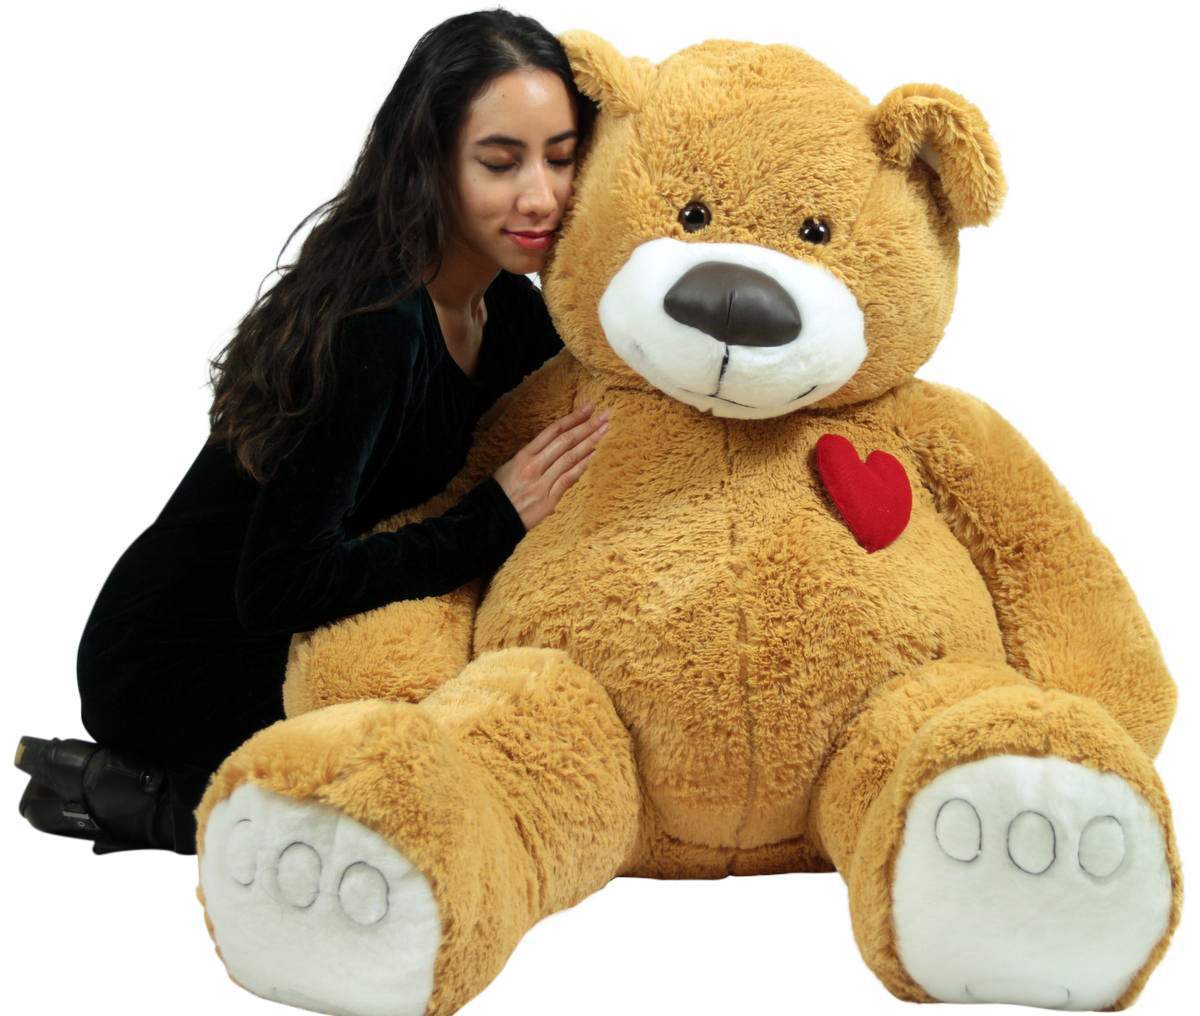 Giant Teddy Bear 57 Inch Soft Huge Plush Animal, Heart on Chest to Express Love - image 1 of 8